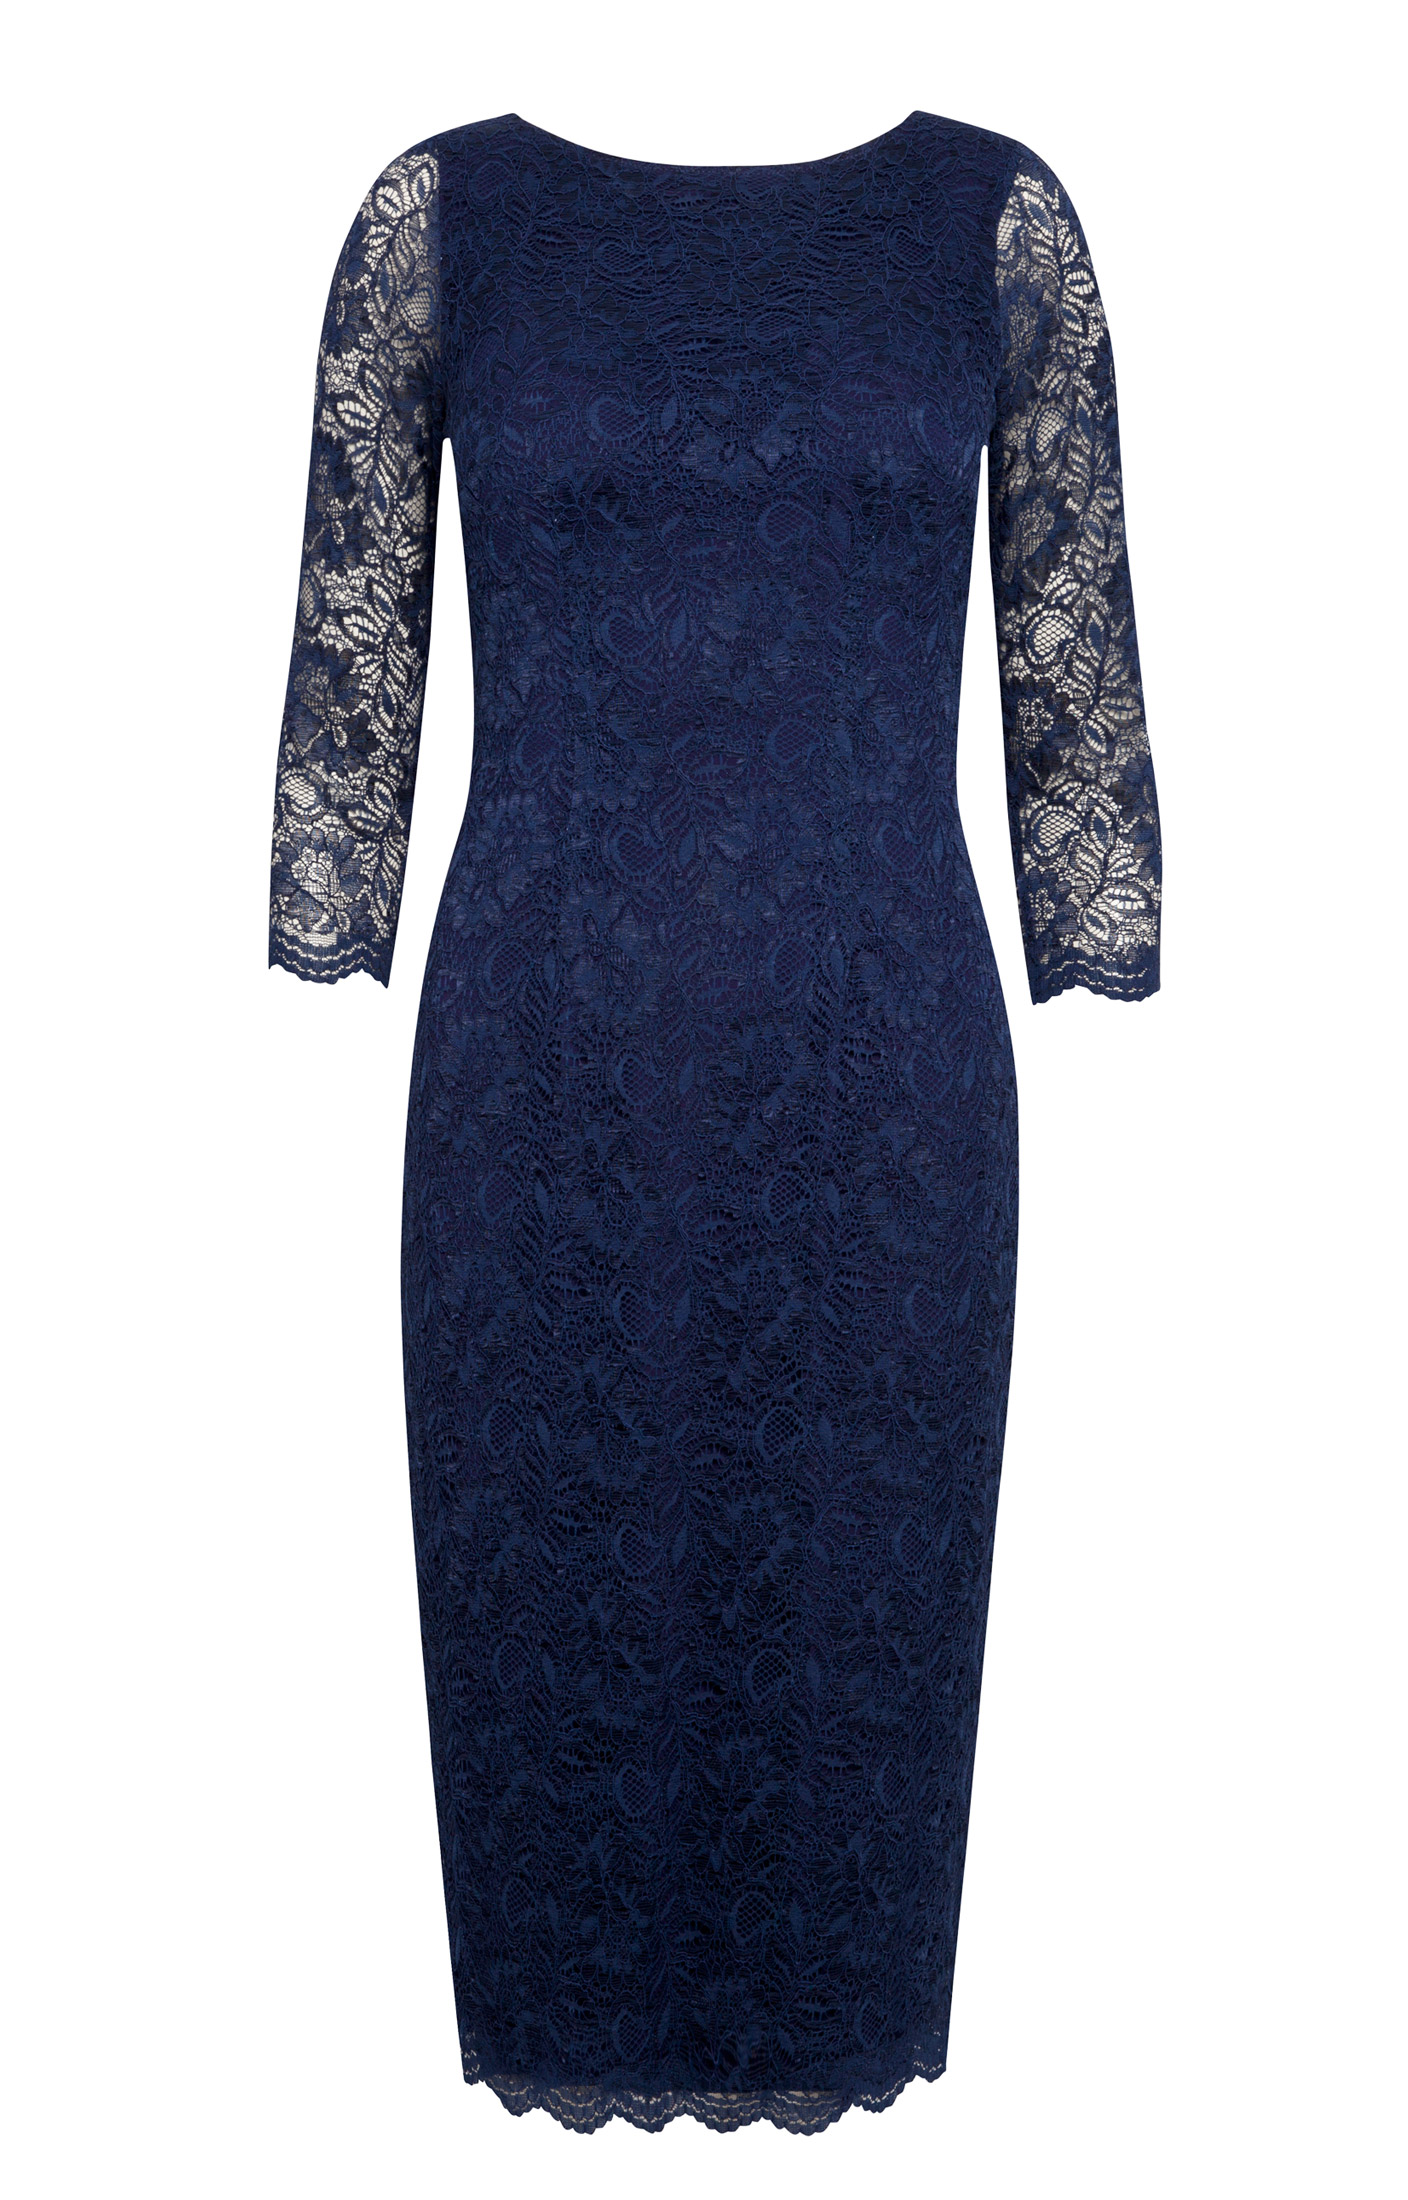 Katherine Lace Occasion Dress (Midnight) - Evening Dresses, Occasion ...